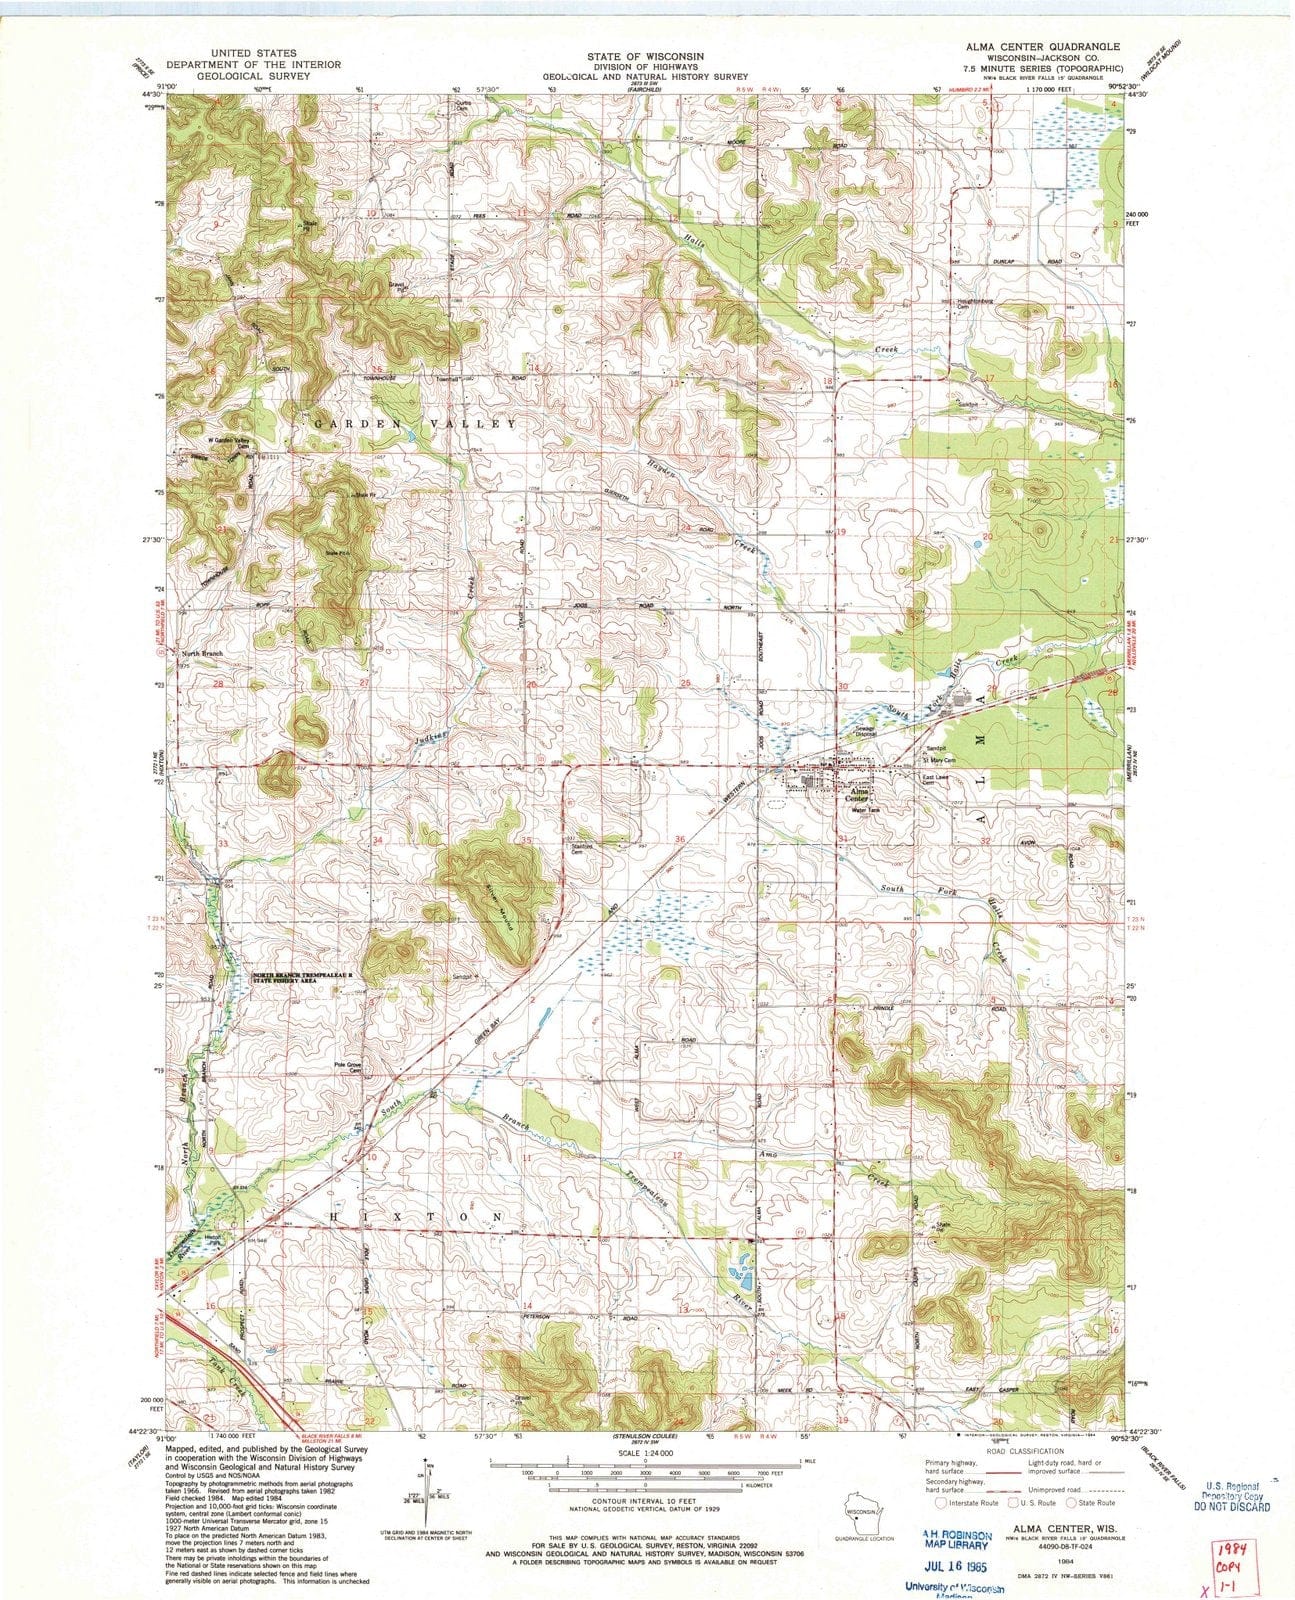 1984 Alma Center, WI - Wisconsin - USGS Topographic Map